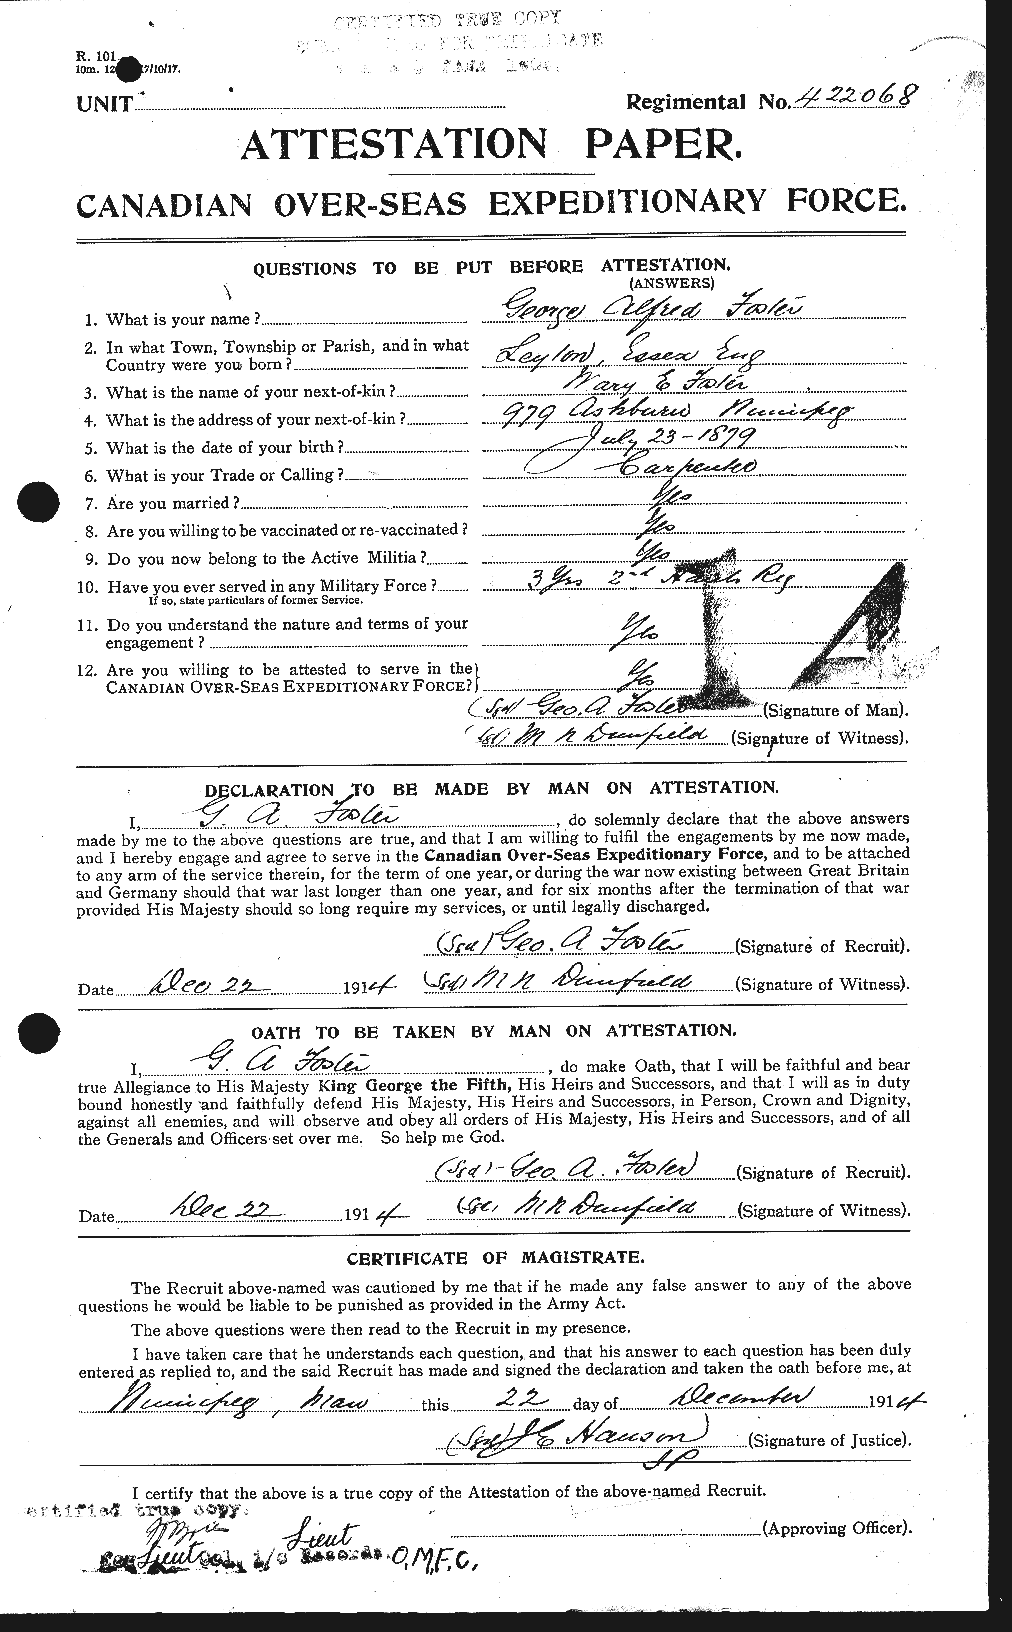 Personnel Records of the First World War - CEF 330678a